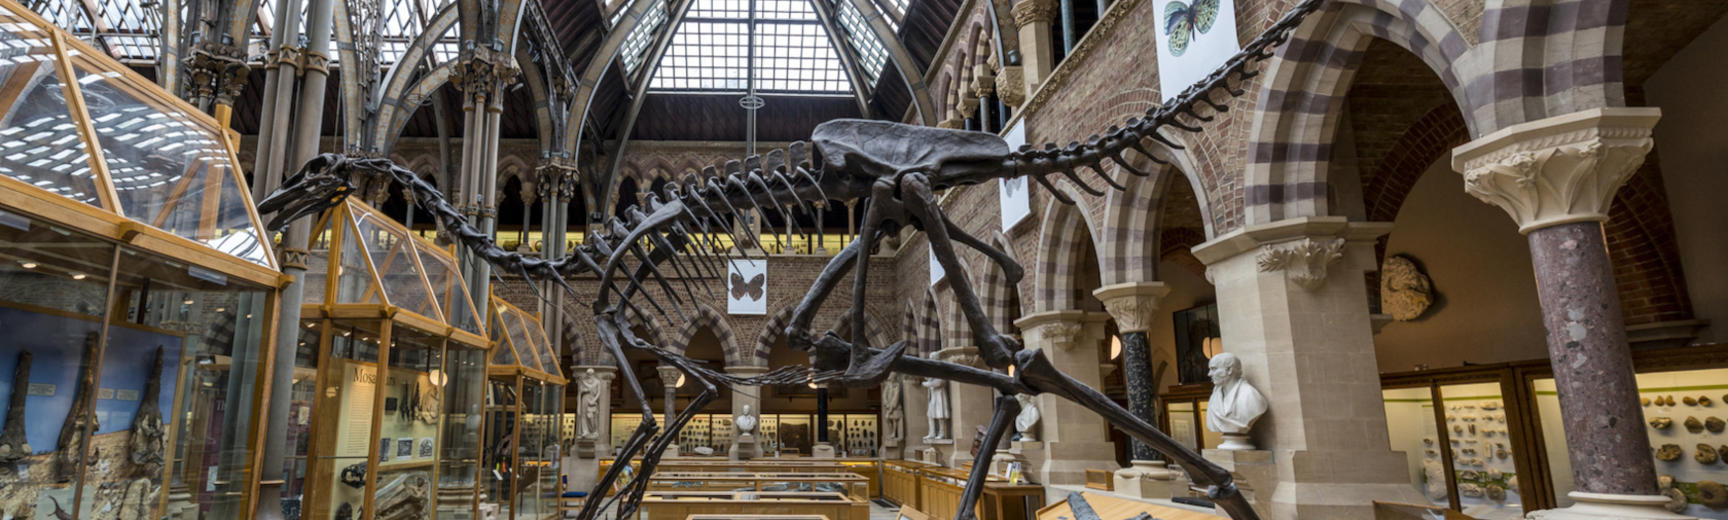 A dinosaur sekelton in the Natural History Museum, Oxford